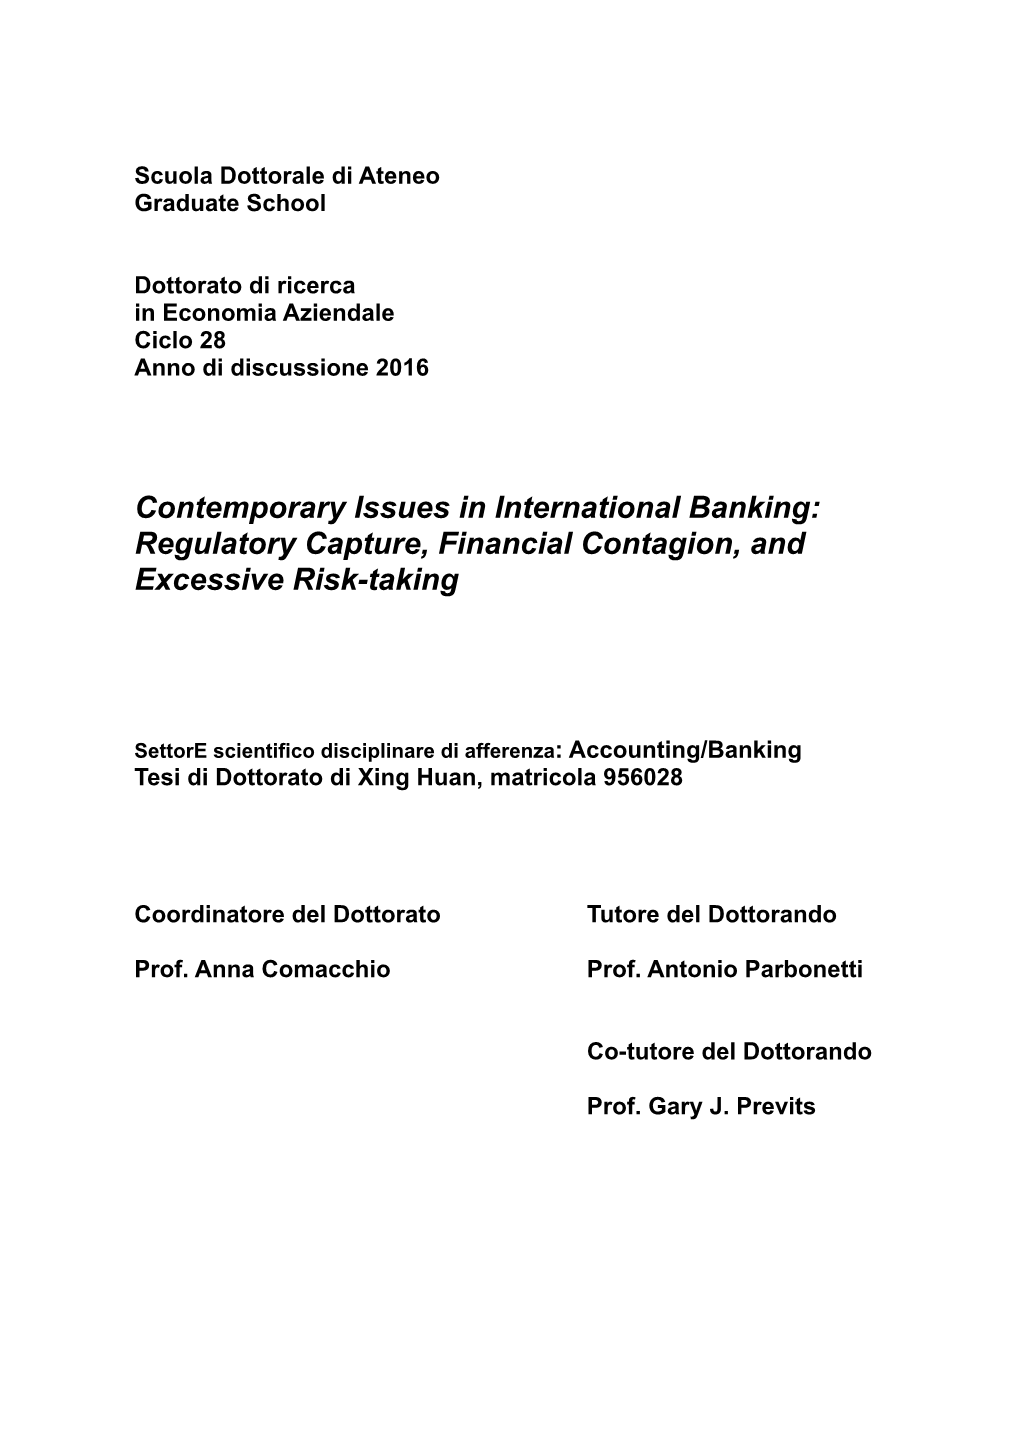 Regulatory Capture, Financial Contagion, and Excessive Risk-Taking